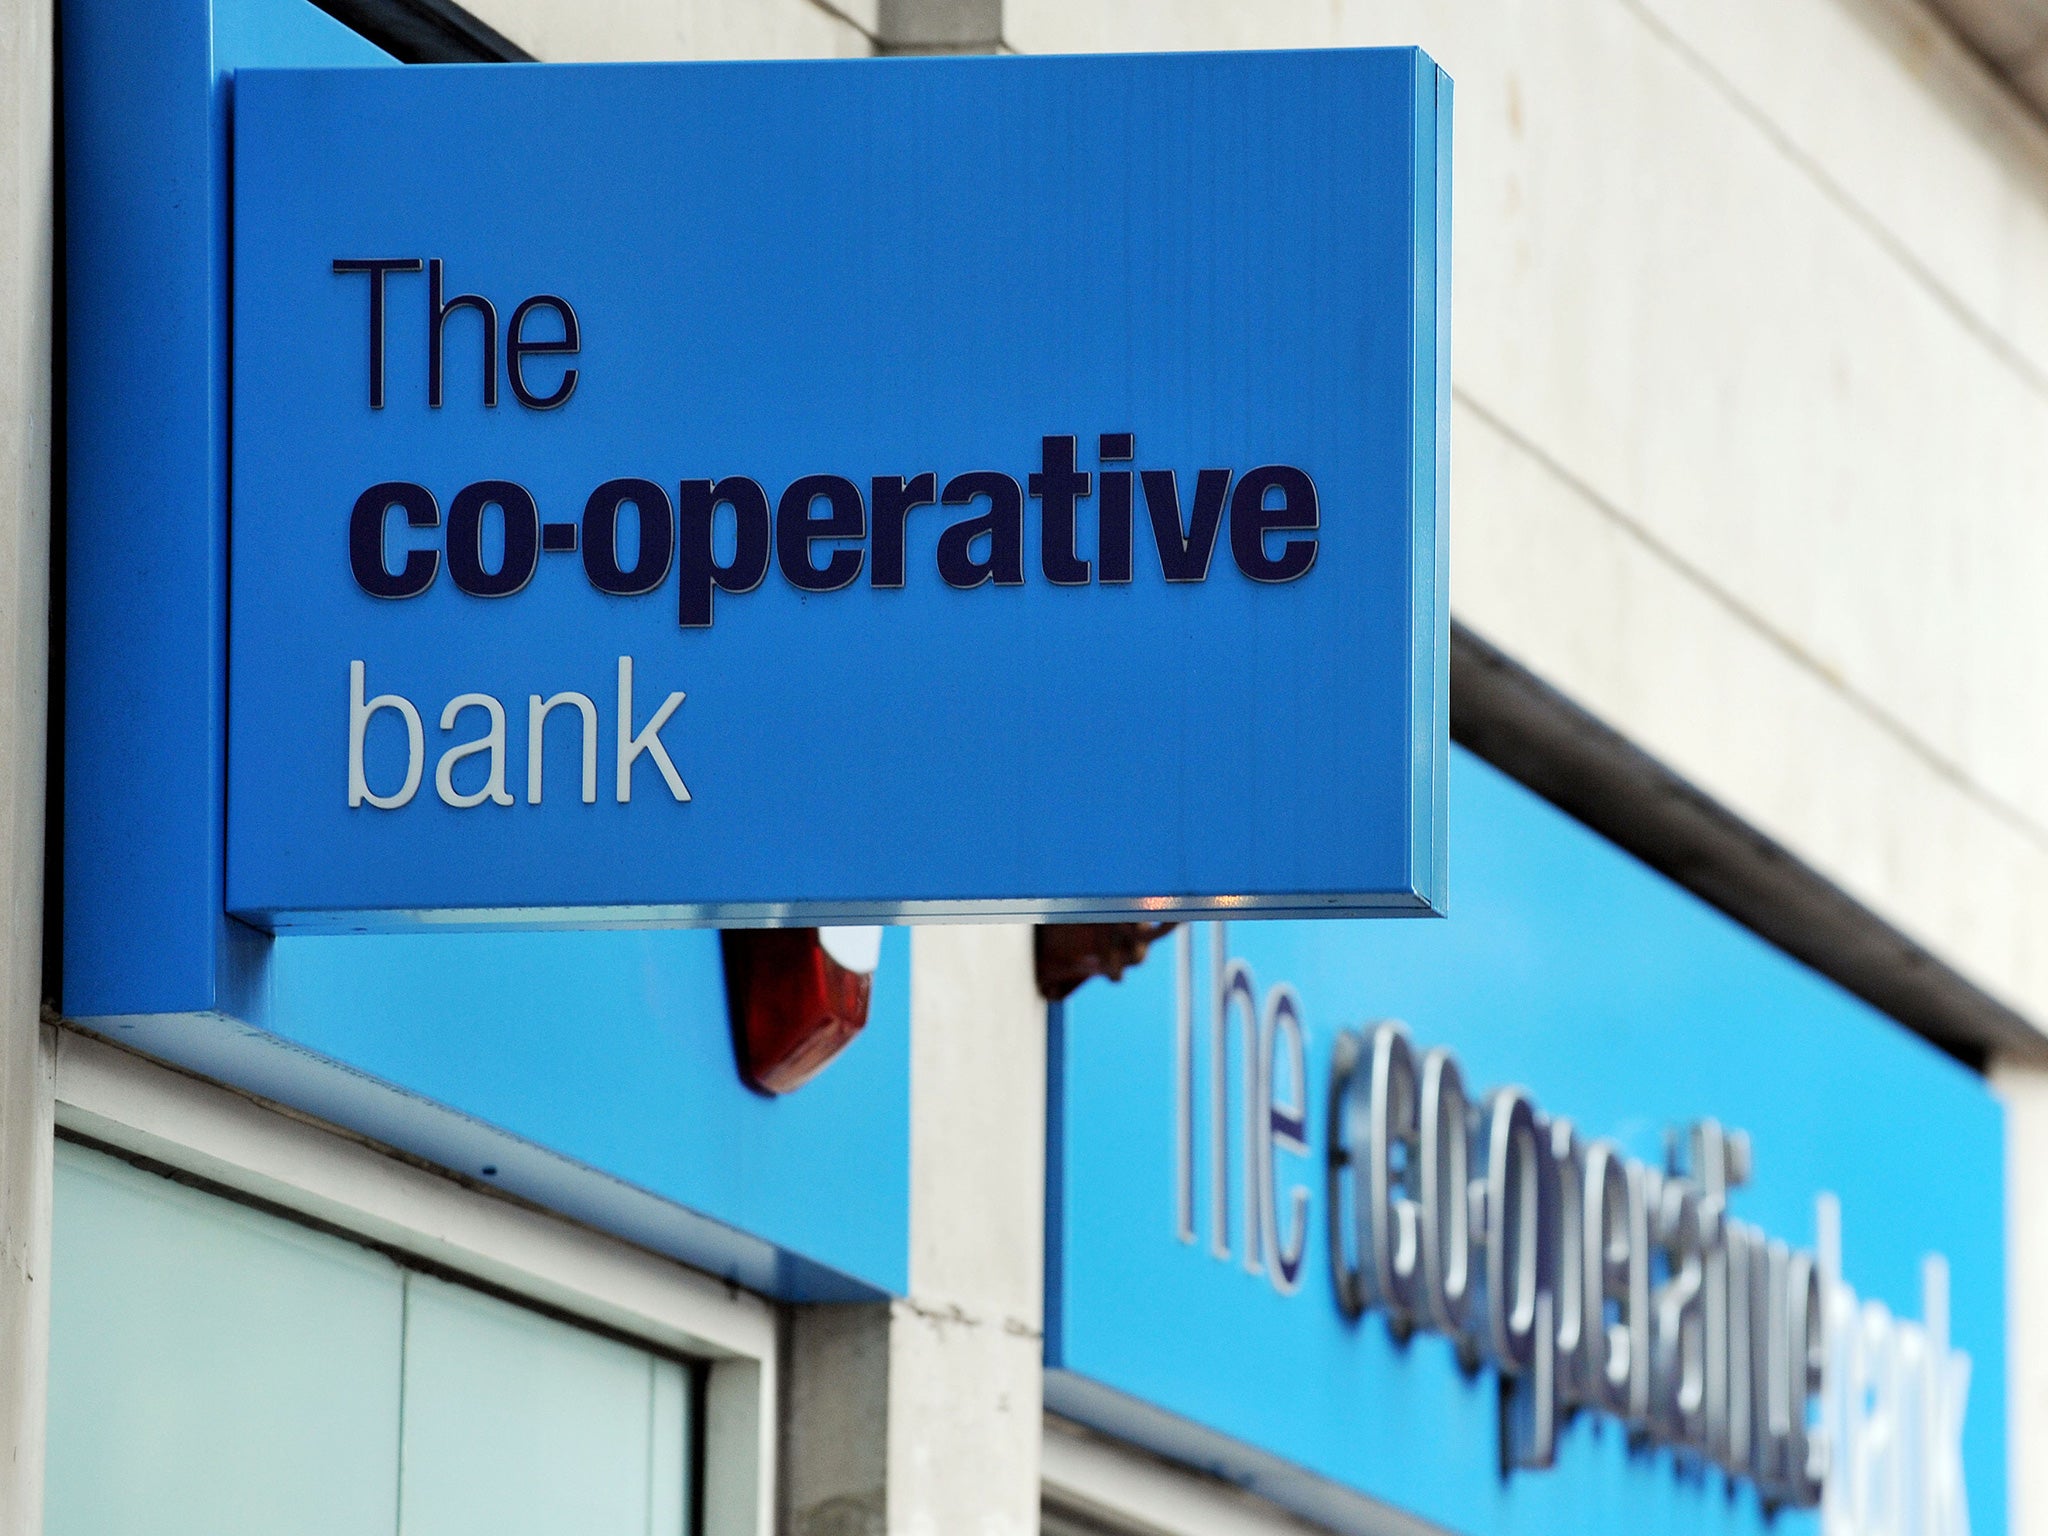 Co-operative Bank has reported bigger losses in part due to higher legal costs